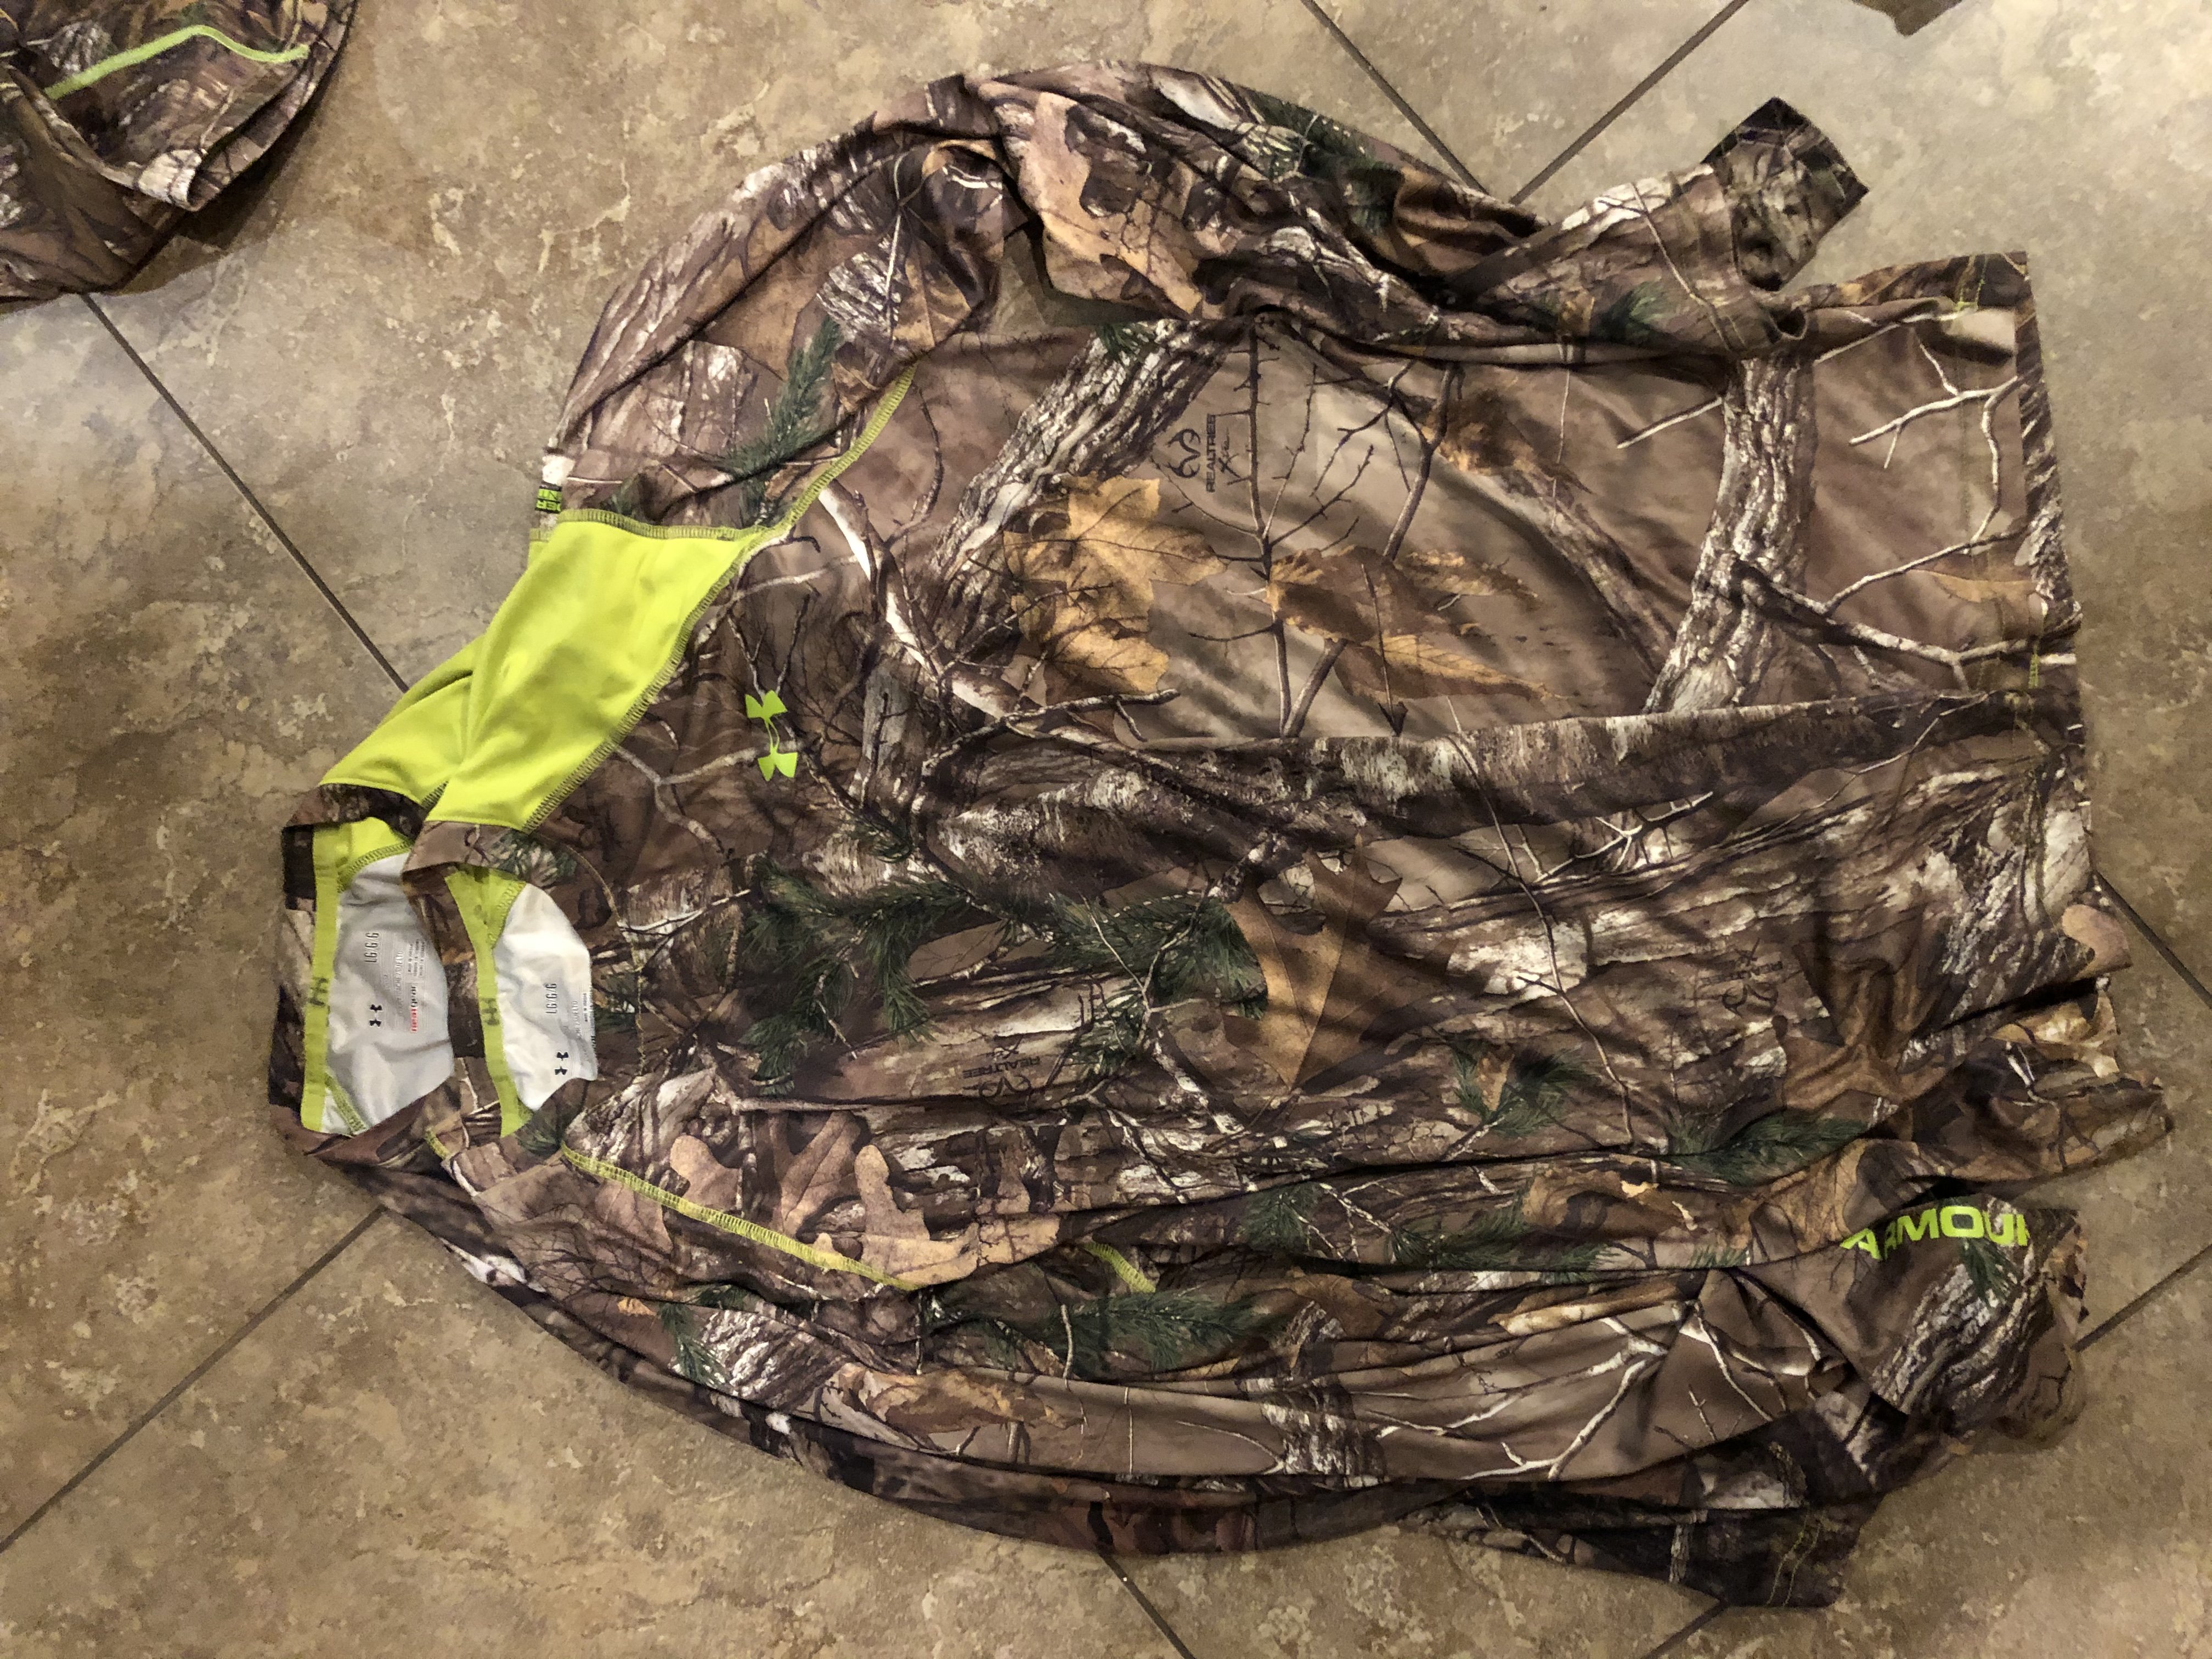 Under Armour Camo Gear - Classified Ads - CouesWhitetail.com Discussion ...